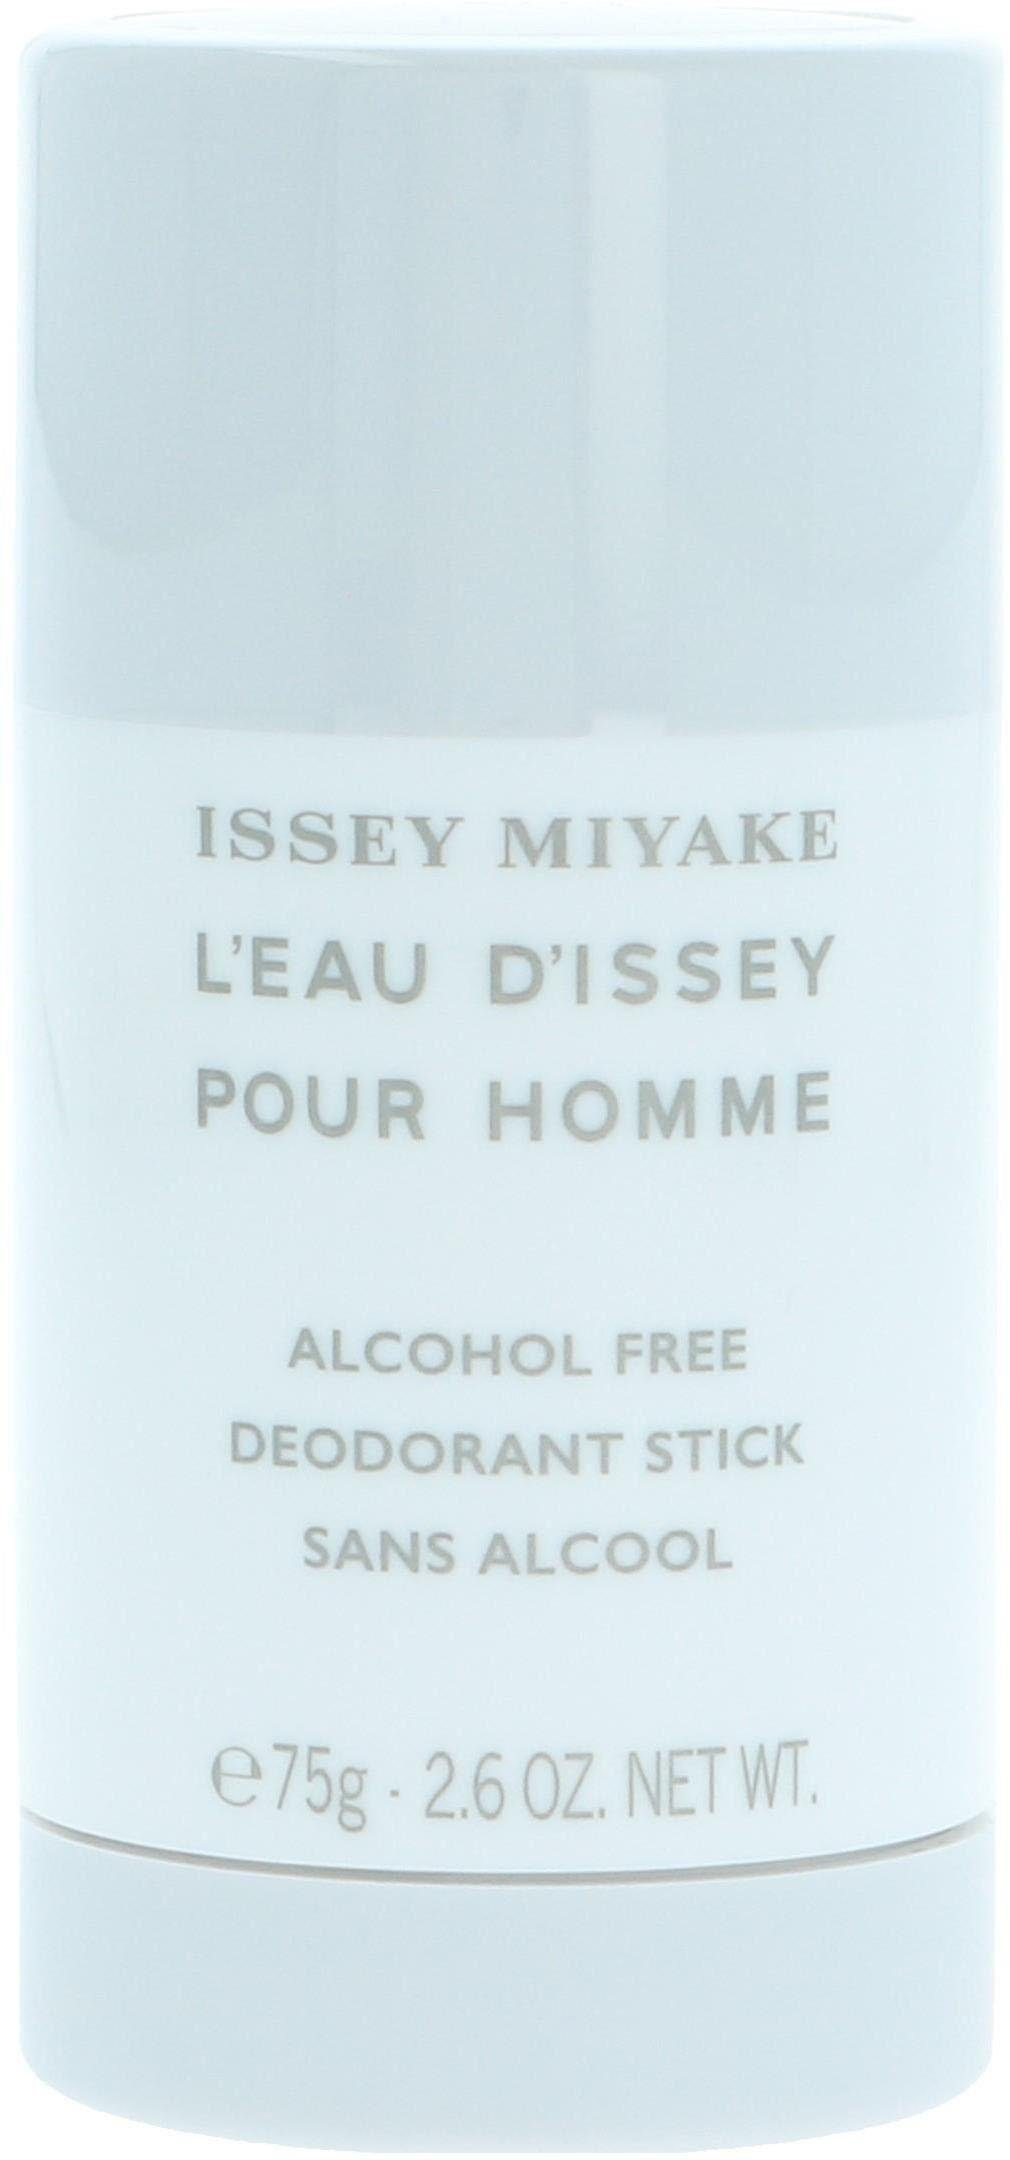 Issey Miyake Deo-Stift Homme Pour L'Eau D'Issey